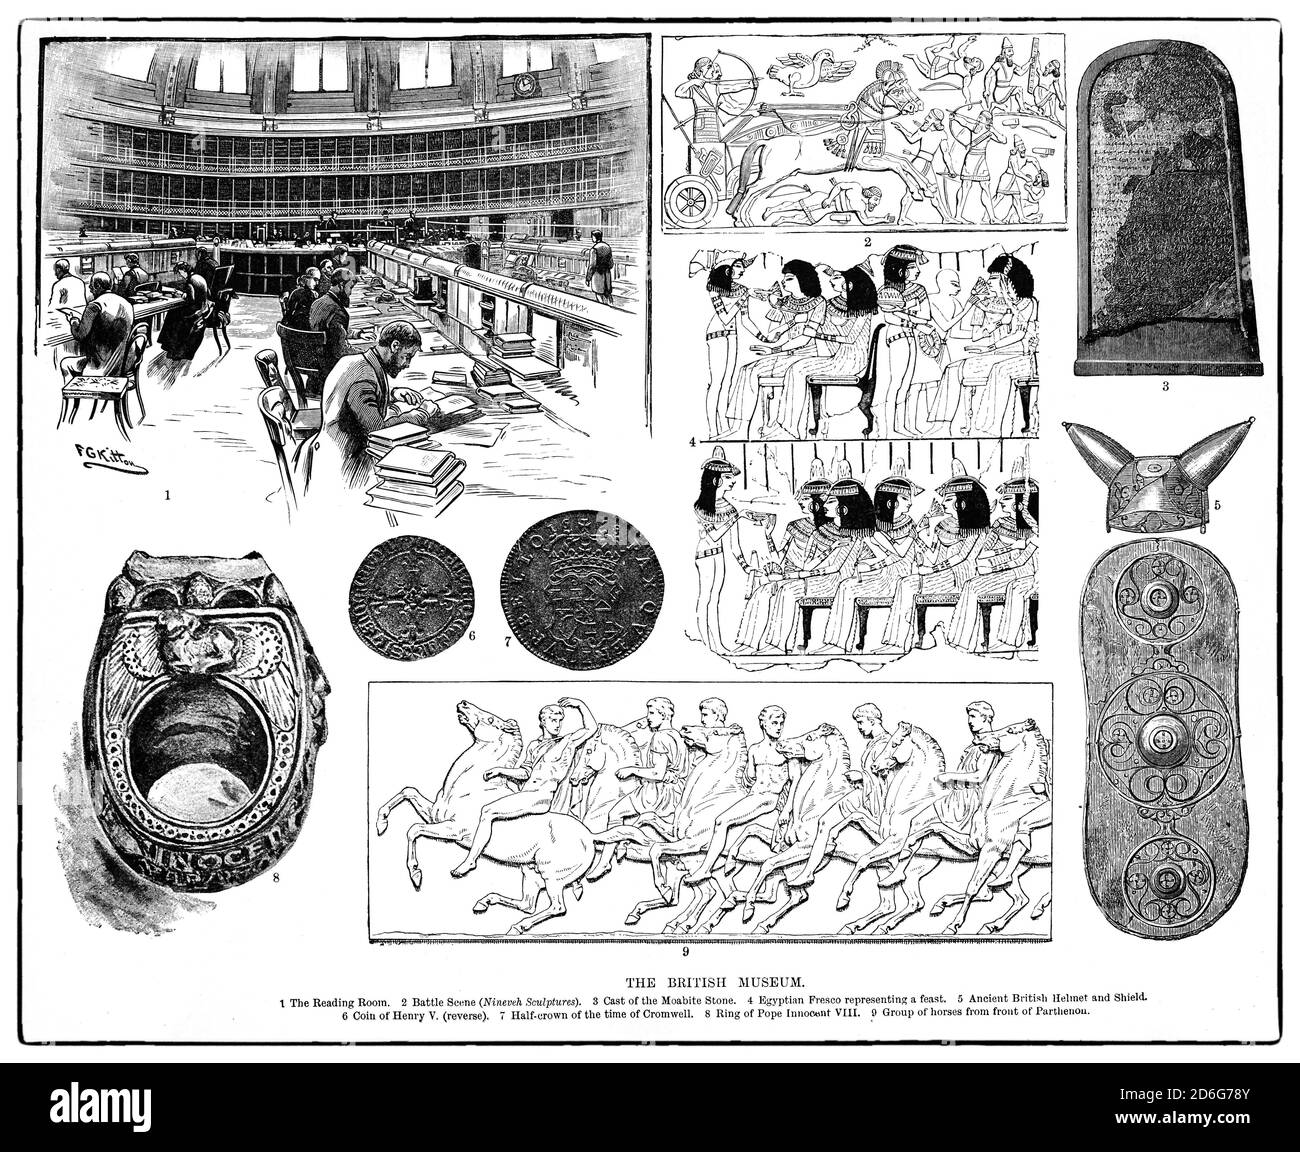 A 19th Century illustration of elements of the British Museum, in the Bloomsbury area of London, United Kingdom. A public institution dedicated to human history, art and culture, its permanent collection,  sourced during the era of the British Empire, of some eight million works is among the largest and most comprehensive in existence. It documents the story of human culture from its beginnings to the presentand was the first public national museum in the world. Stock Photo